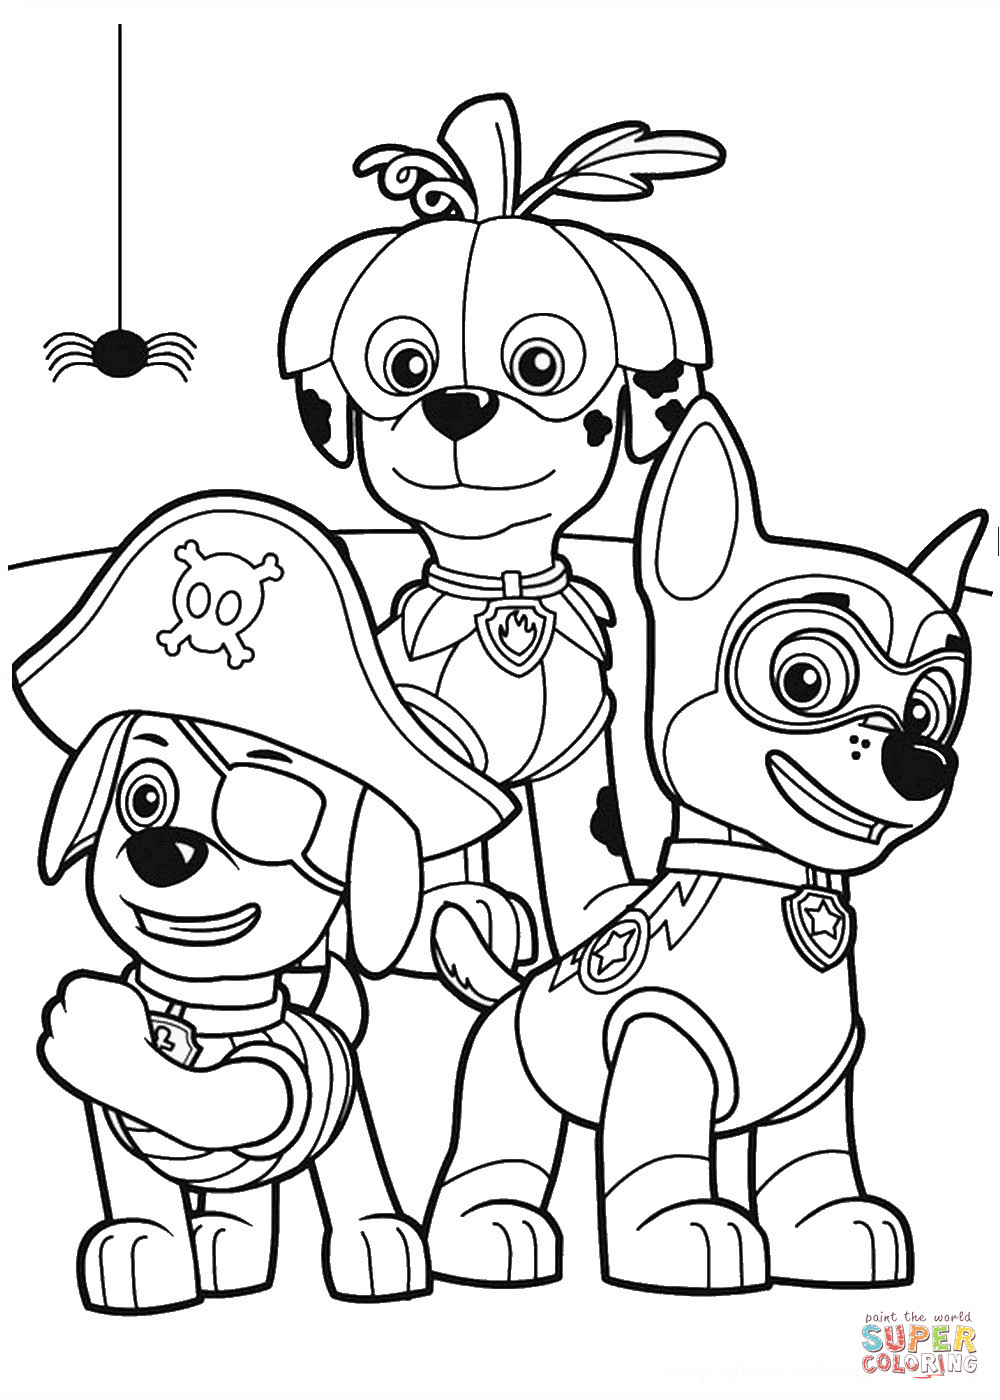 Paw Patrol Printable Coloring Pages
 Paw Patrol Halloween Party coloring page